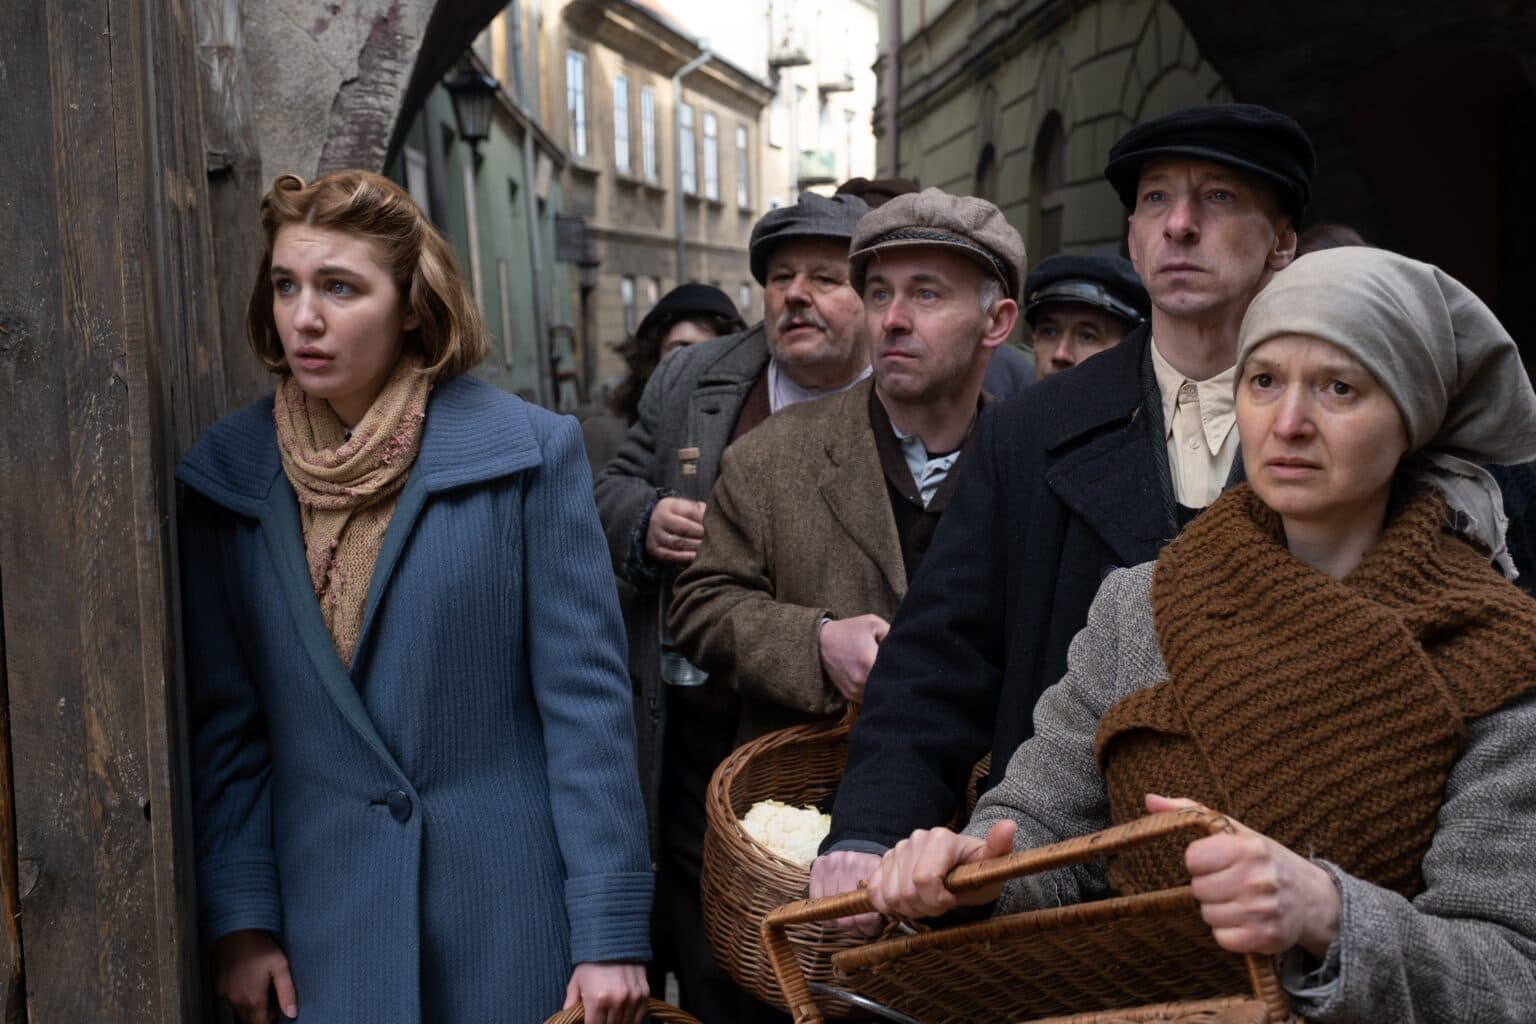 Inspired by Faith, Holocaust Movie 'Irena's Vow' Delivers Must-See Message for Today